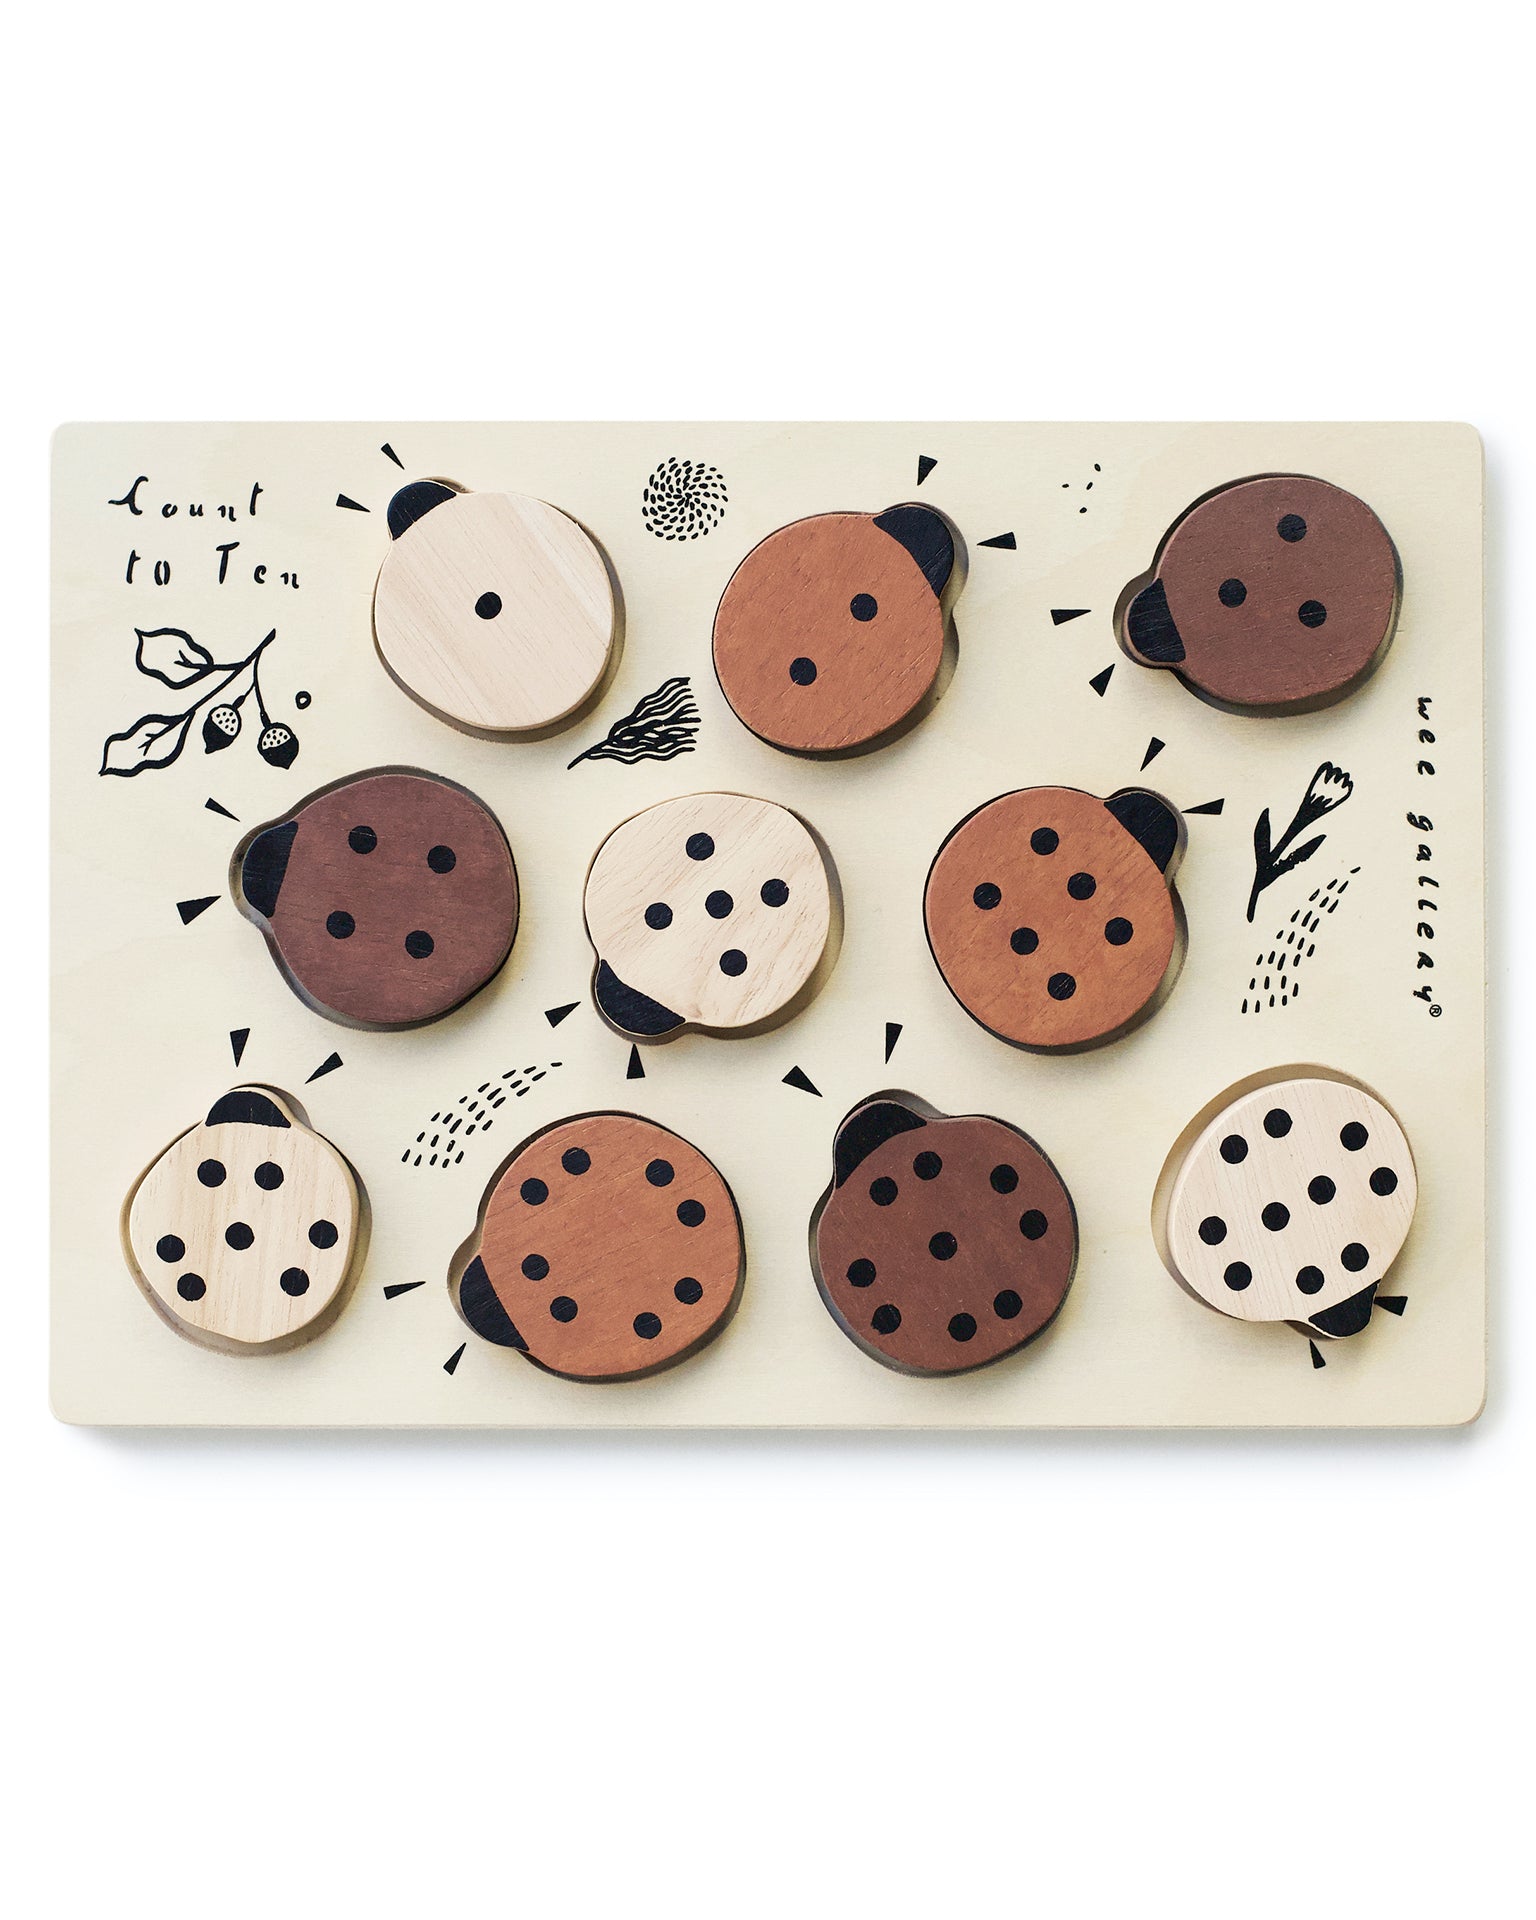 Little wee gallery play count to 10 ladybugs wooden tray puzzle